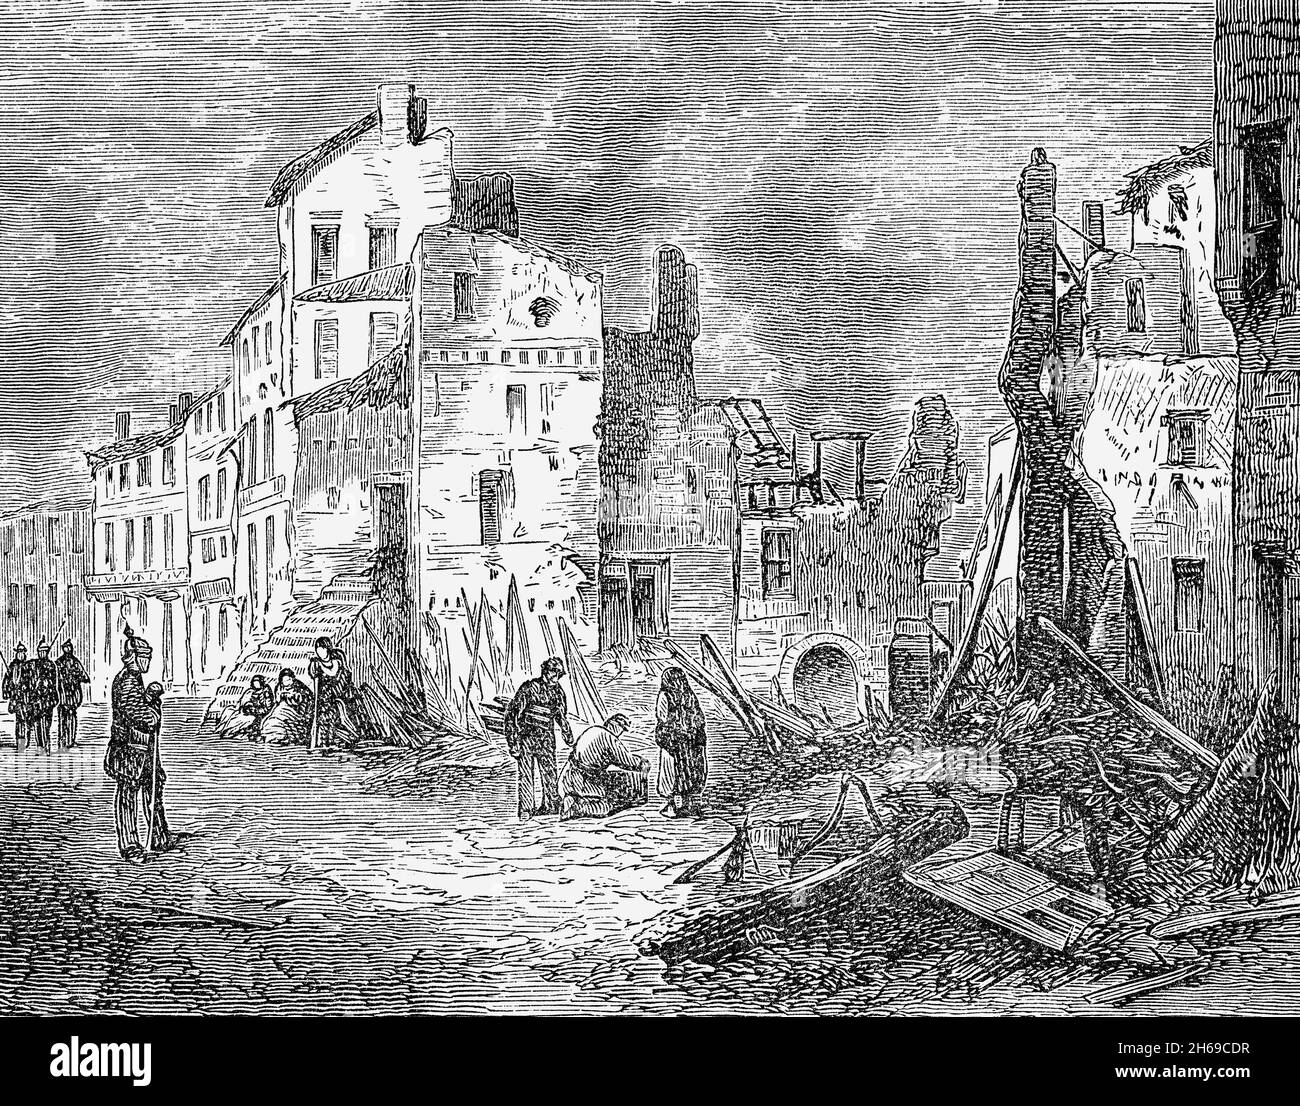 A late 19th Century illustration of the ruins of Thionville in the northeastern French department of Moselle on the left bank of the river Moselle. After the Franco-Prussian War of 1870, the area of Alsace-Lorraine was annexed by the newly created German Empire in 1871 by the Treaty of Frankfurt and became a Reichsland. Stock Photo